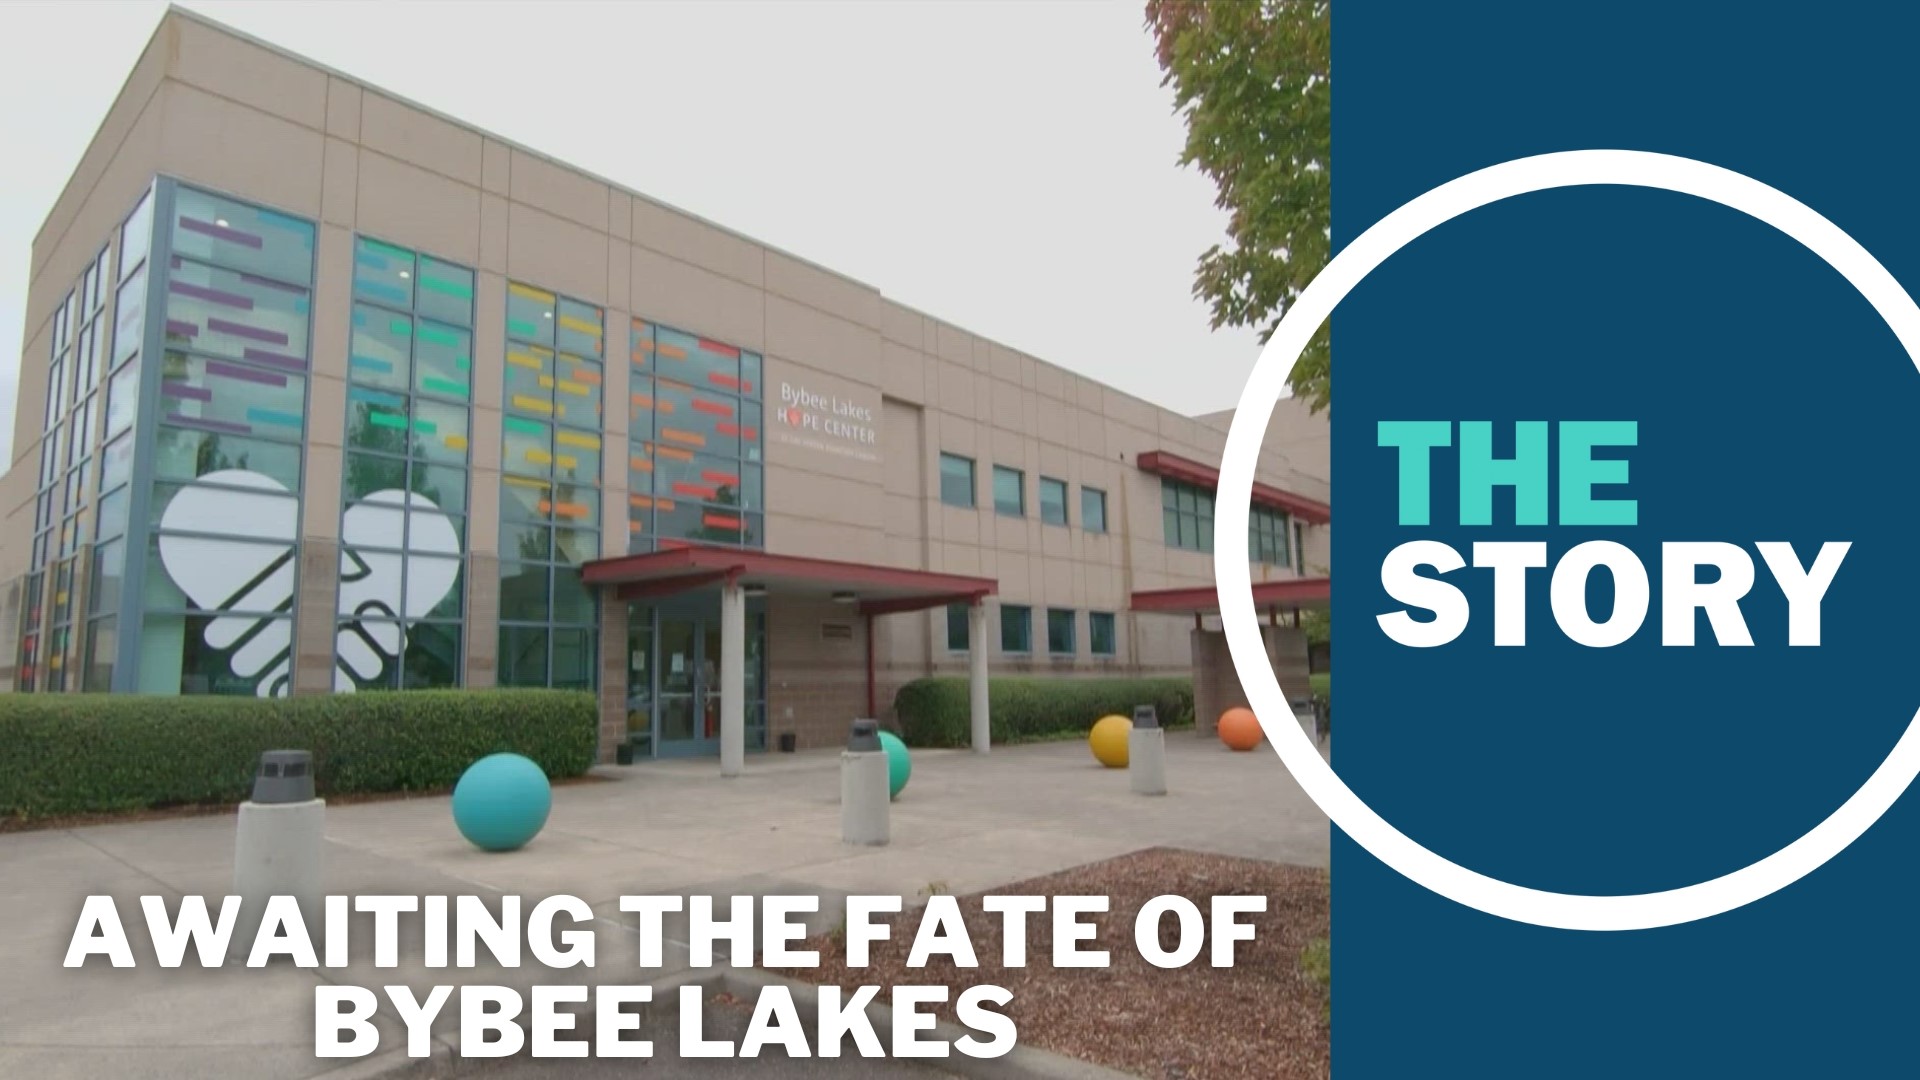 Bybee Lakes' founder has said that they have enough money to stay open through the end of this week. Multnomah County could step in at the last minute to fund them.